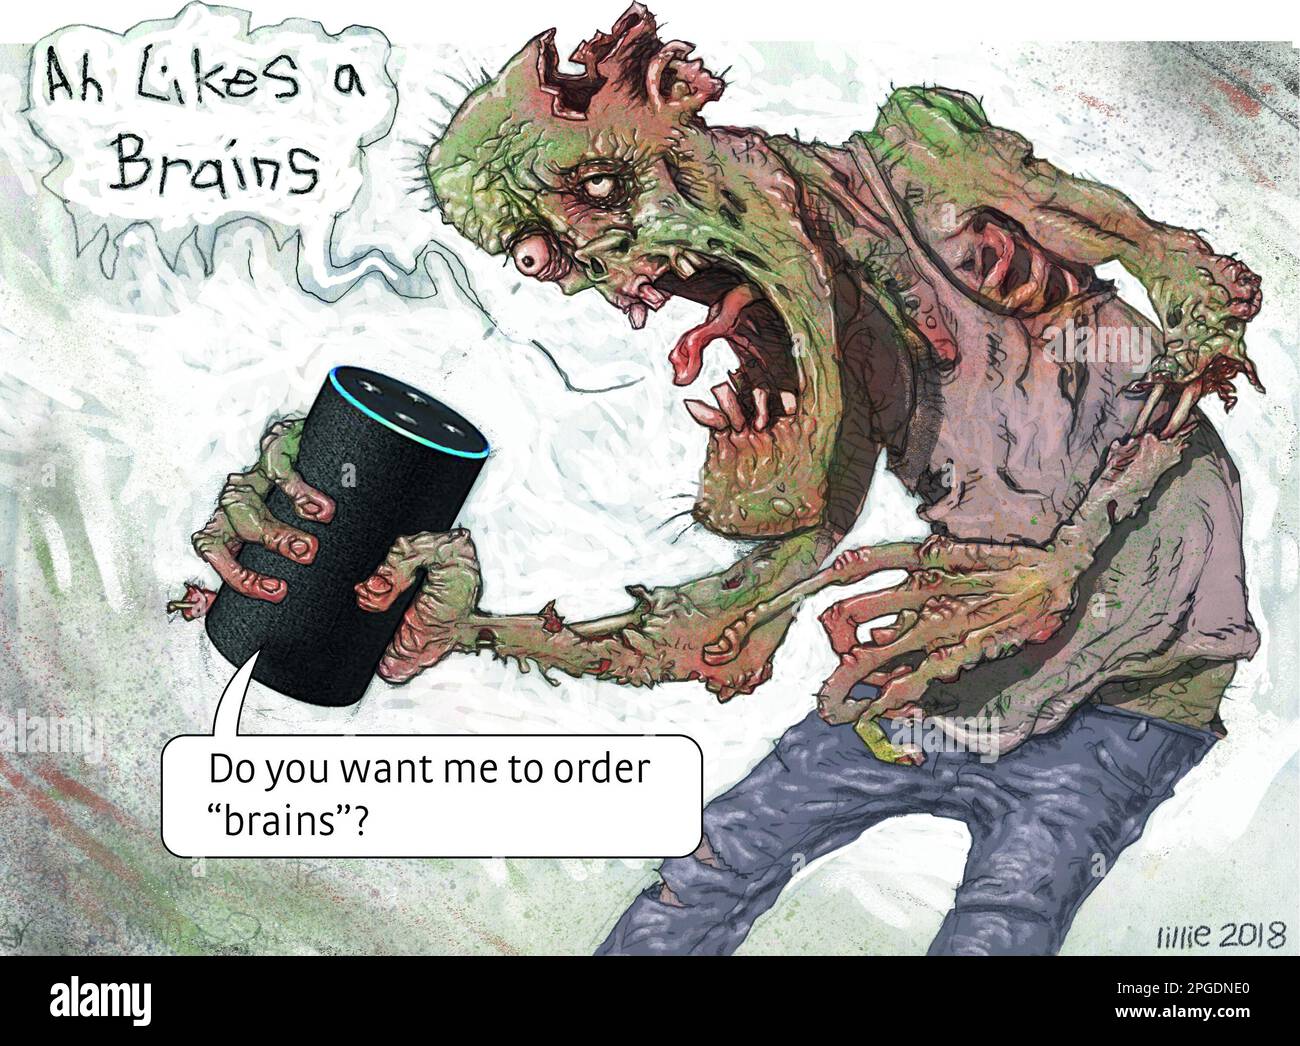 Funny art zombie saying 'Ah likes a Brains' Alexa replies 'do you want me to order brains?' when NPL based intelligent virtual assistant (IVA) is dumb Stock Photo